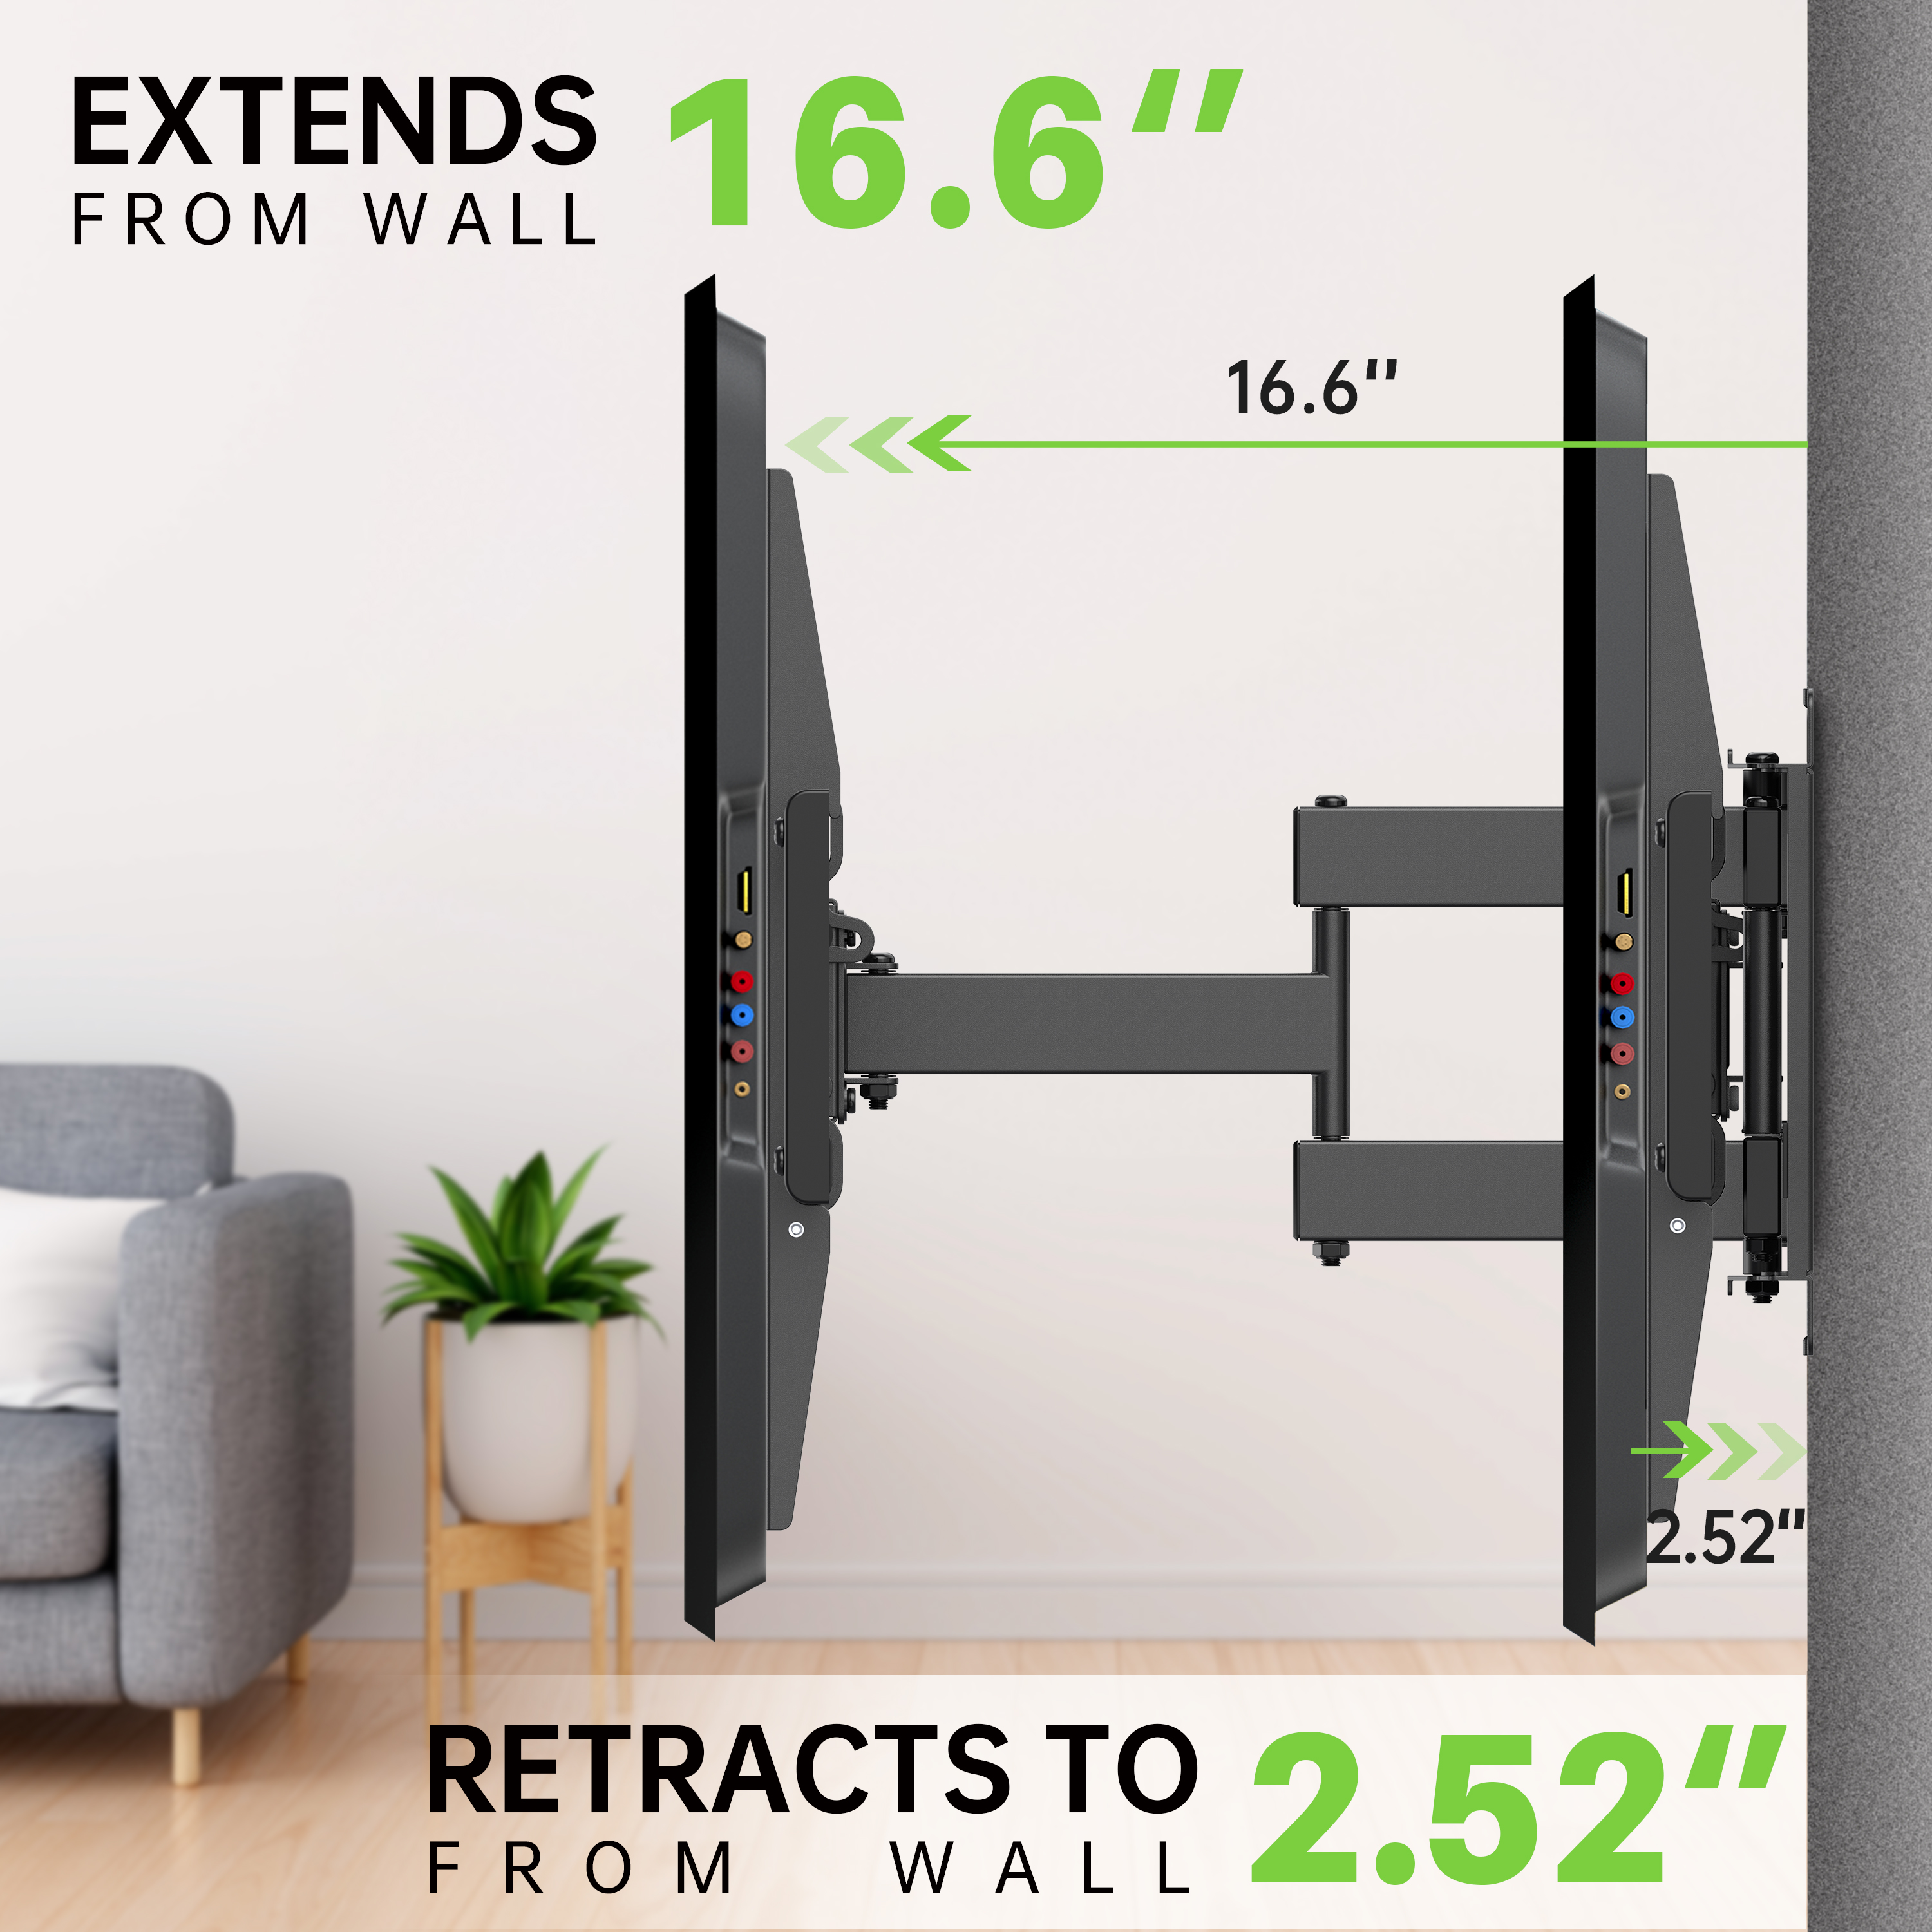 USX MOUNT Full Motion TV Wall Mount for 47-90 inch TVs Universal Swivels Tilts Extension Leveling Hold up to 132lb Max VESA 600x400mm, 16" Wood Stud - image 5 of 9